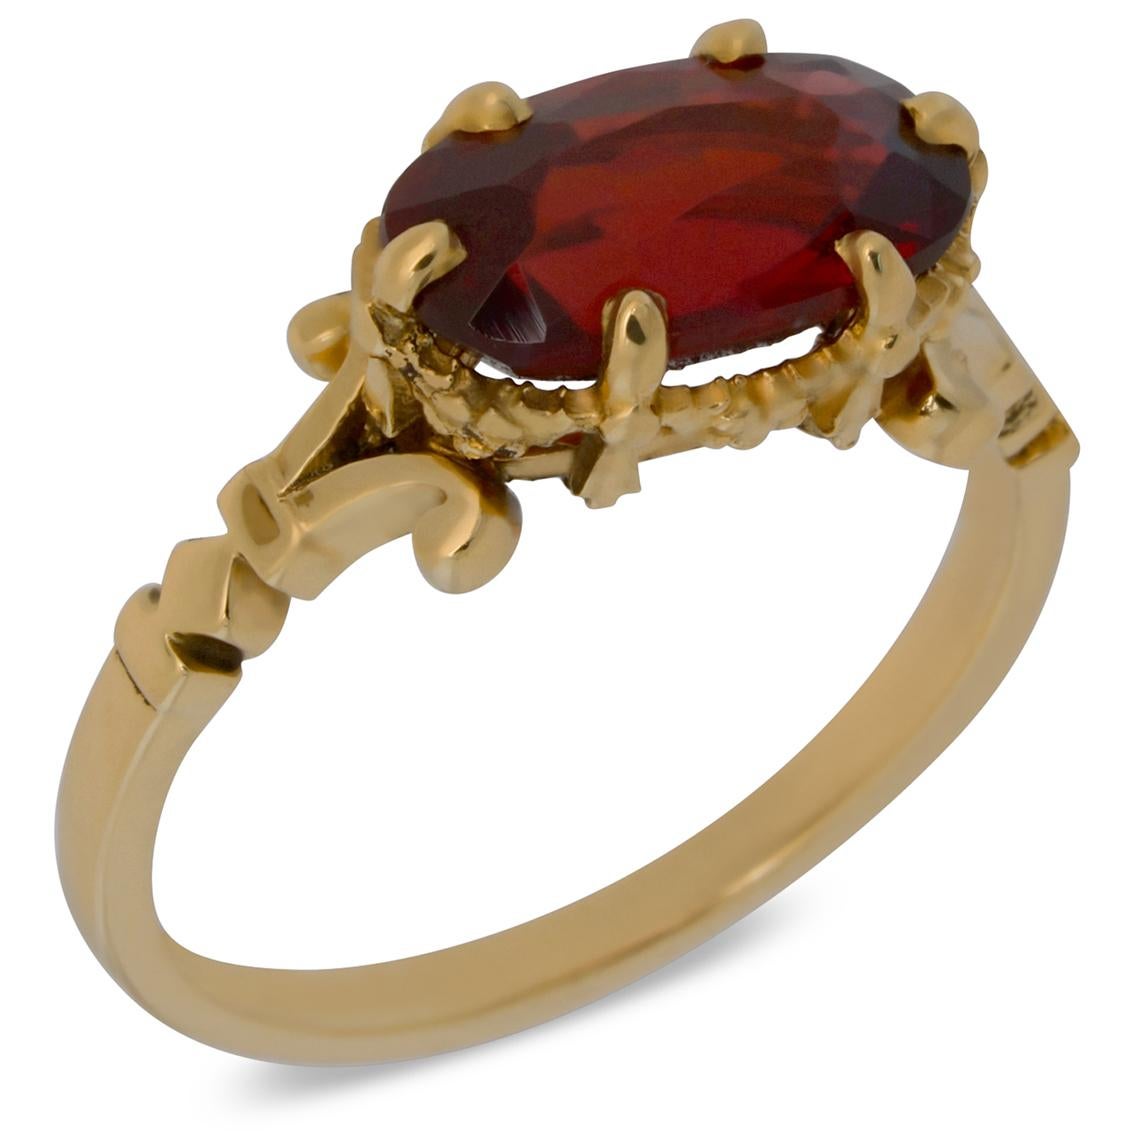 Exquisitely handcrafted in 9kt yellow gold this otherworldly ring features a gorgeous 11mm (L) x 6.5mm (W) x 4mm (D) oval cut garnet aloft a signature William Llewellyn Griffiths split shank and garland setting decorated with fine floral details.